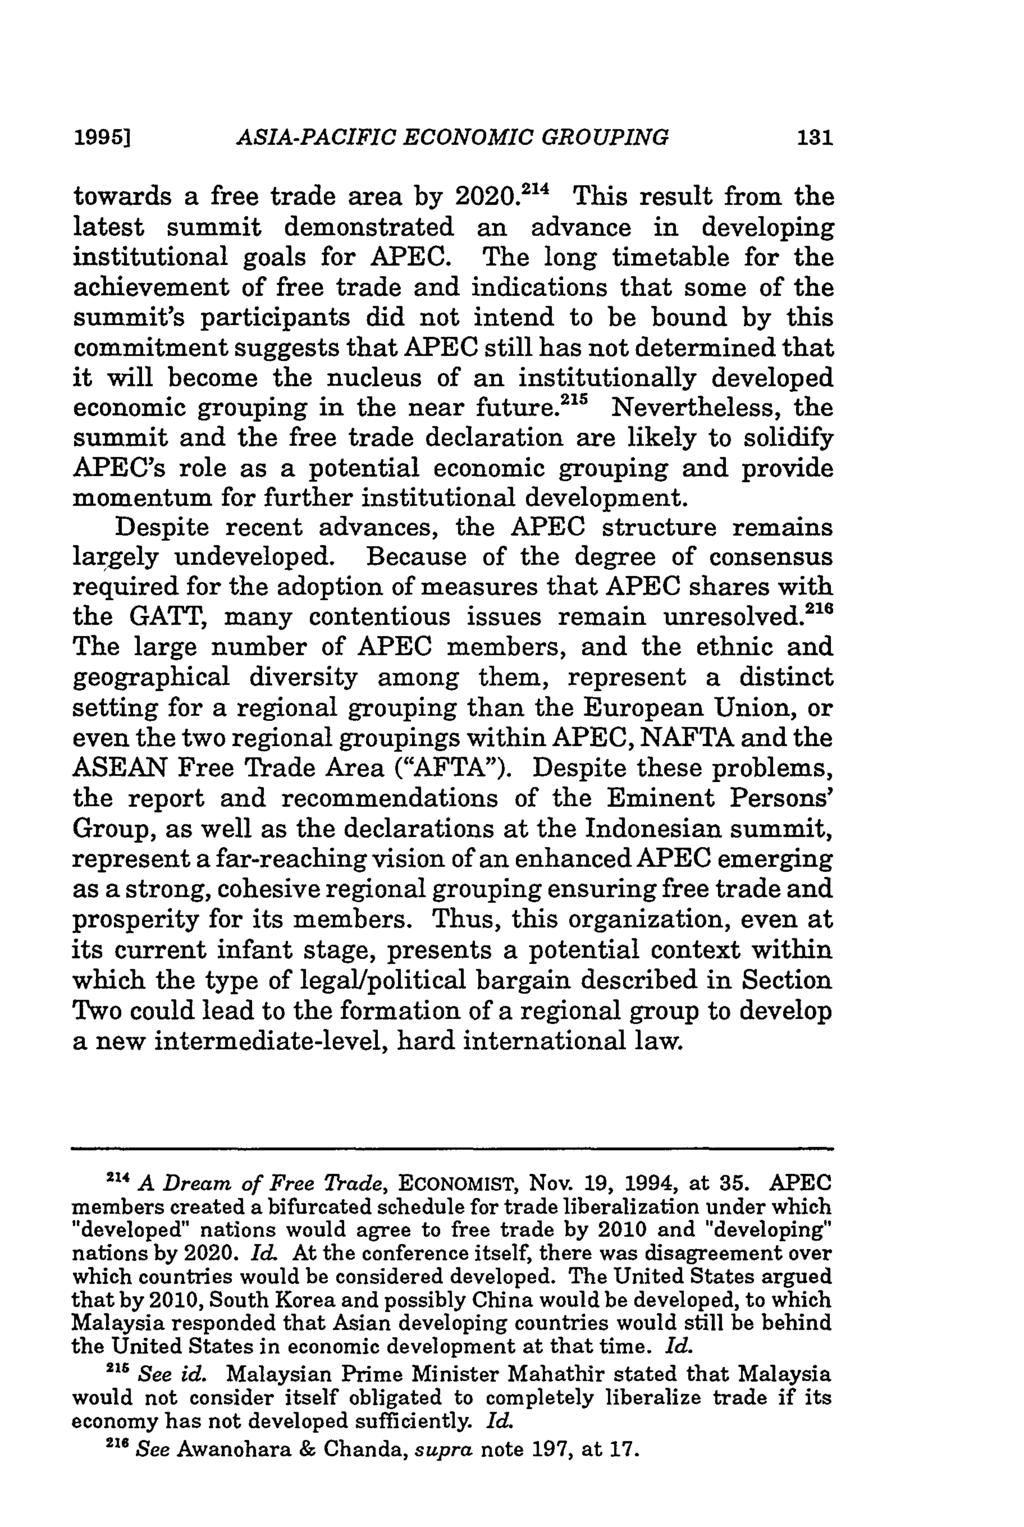 1995] ASIA-PACIFIC ECONOMIC GROUPING towards a free trade area by 2020.2"4 This result from the latest summit demonstrated an advance in developing institutional goals for APEC.